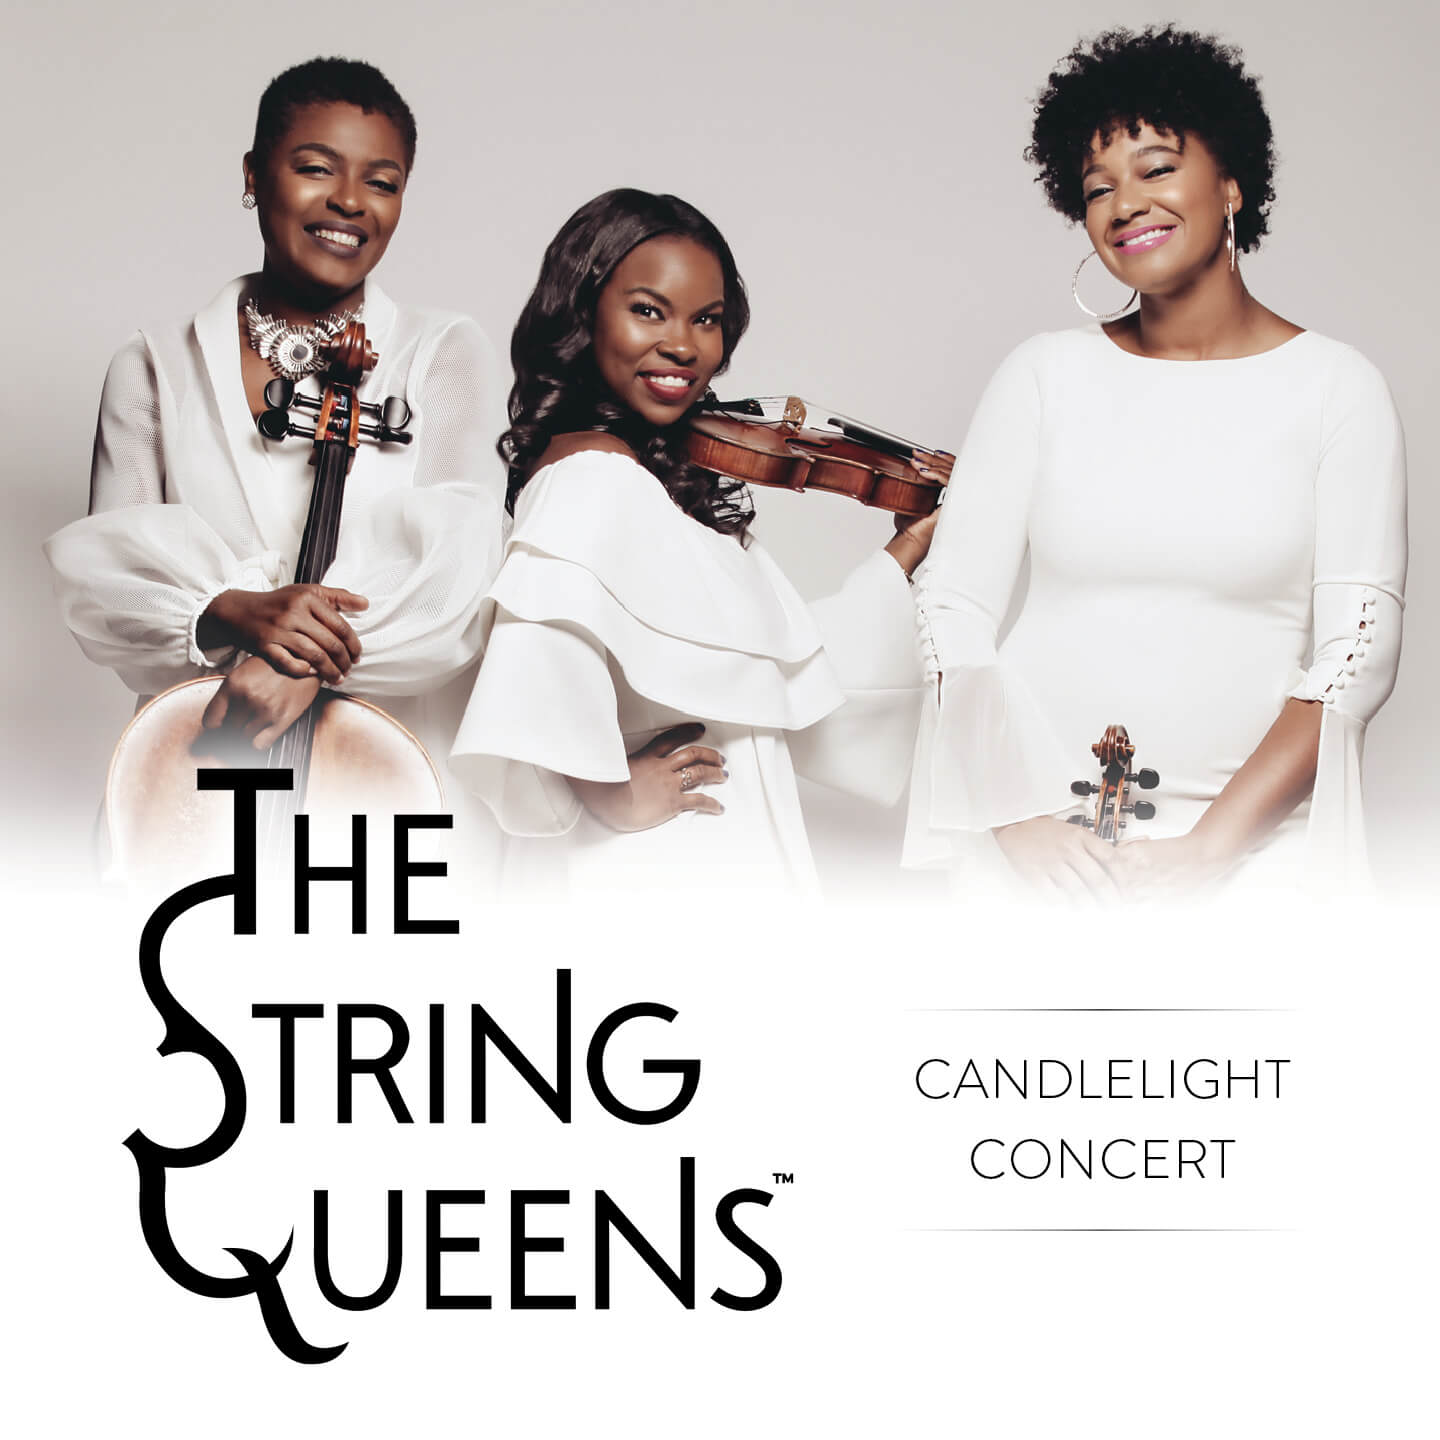 The String Queens